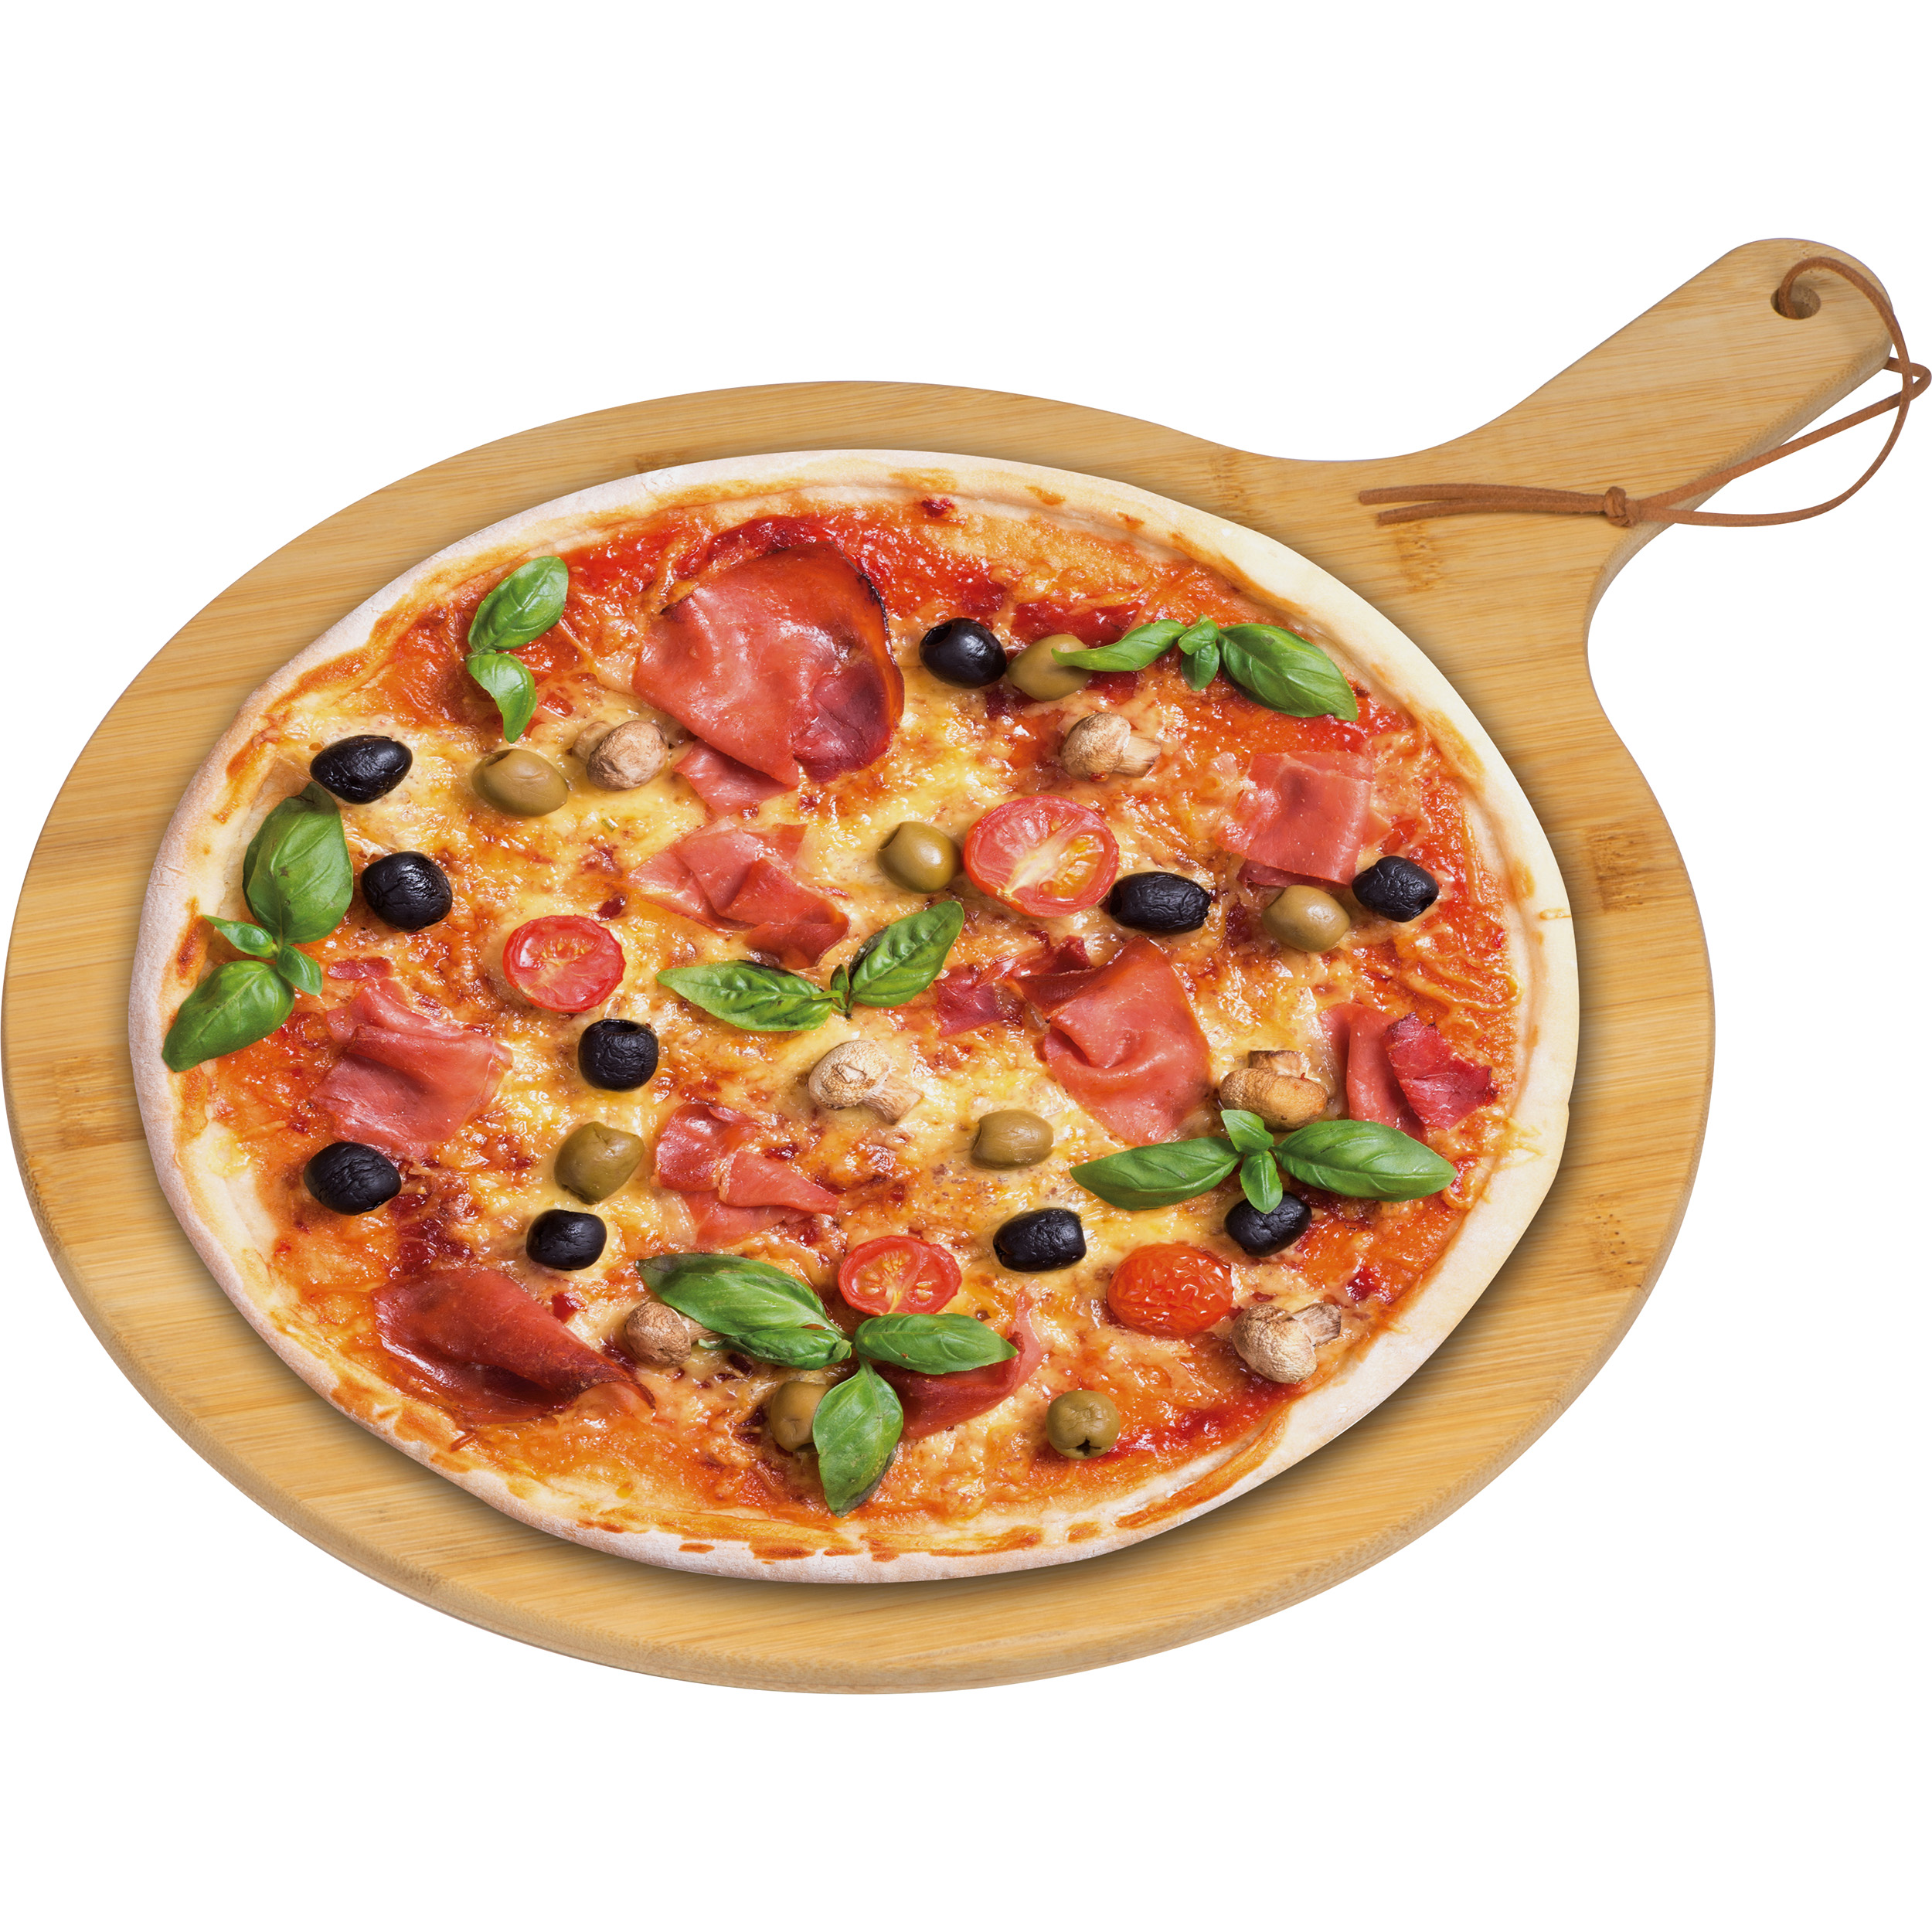 Round pizza and serving tray